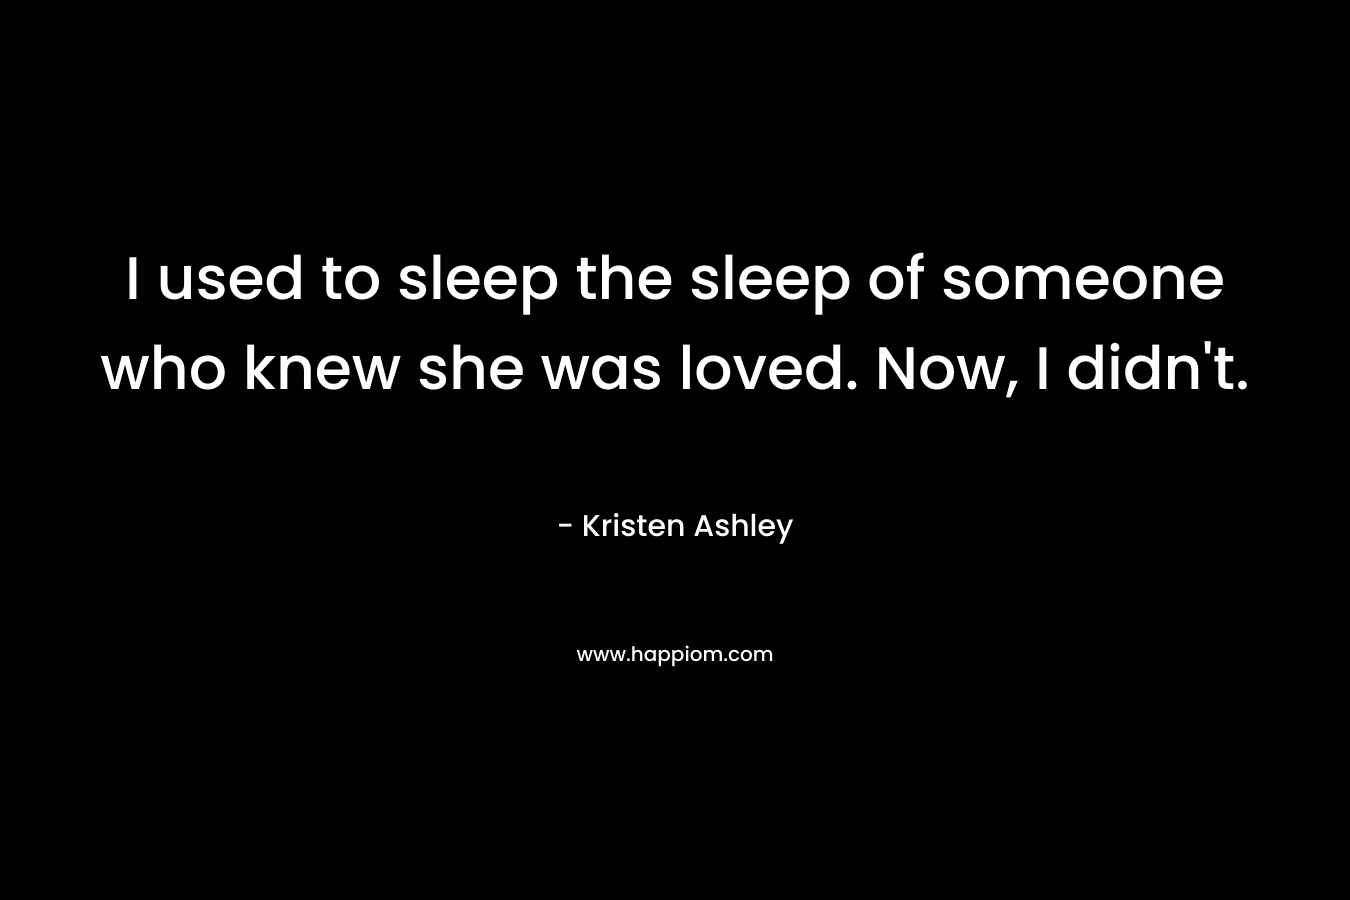 I used to sleep the sleep of someone who knew she was loved. Now, I didn’t. – Kristen Ashley